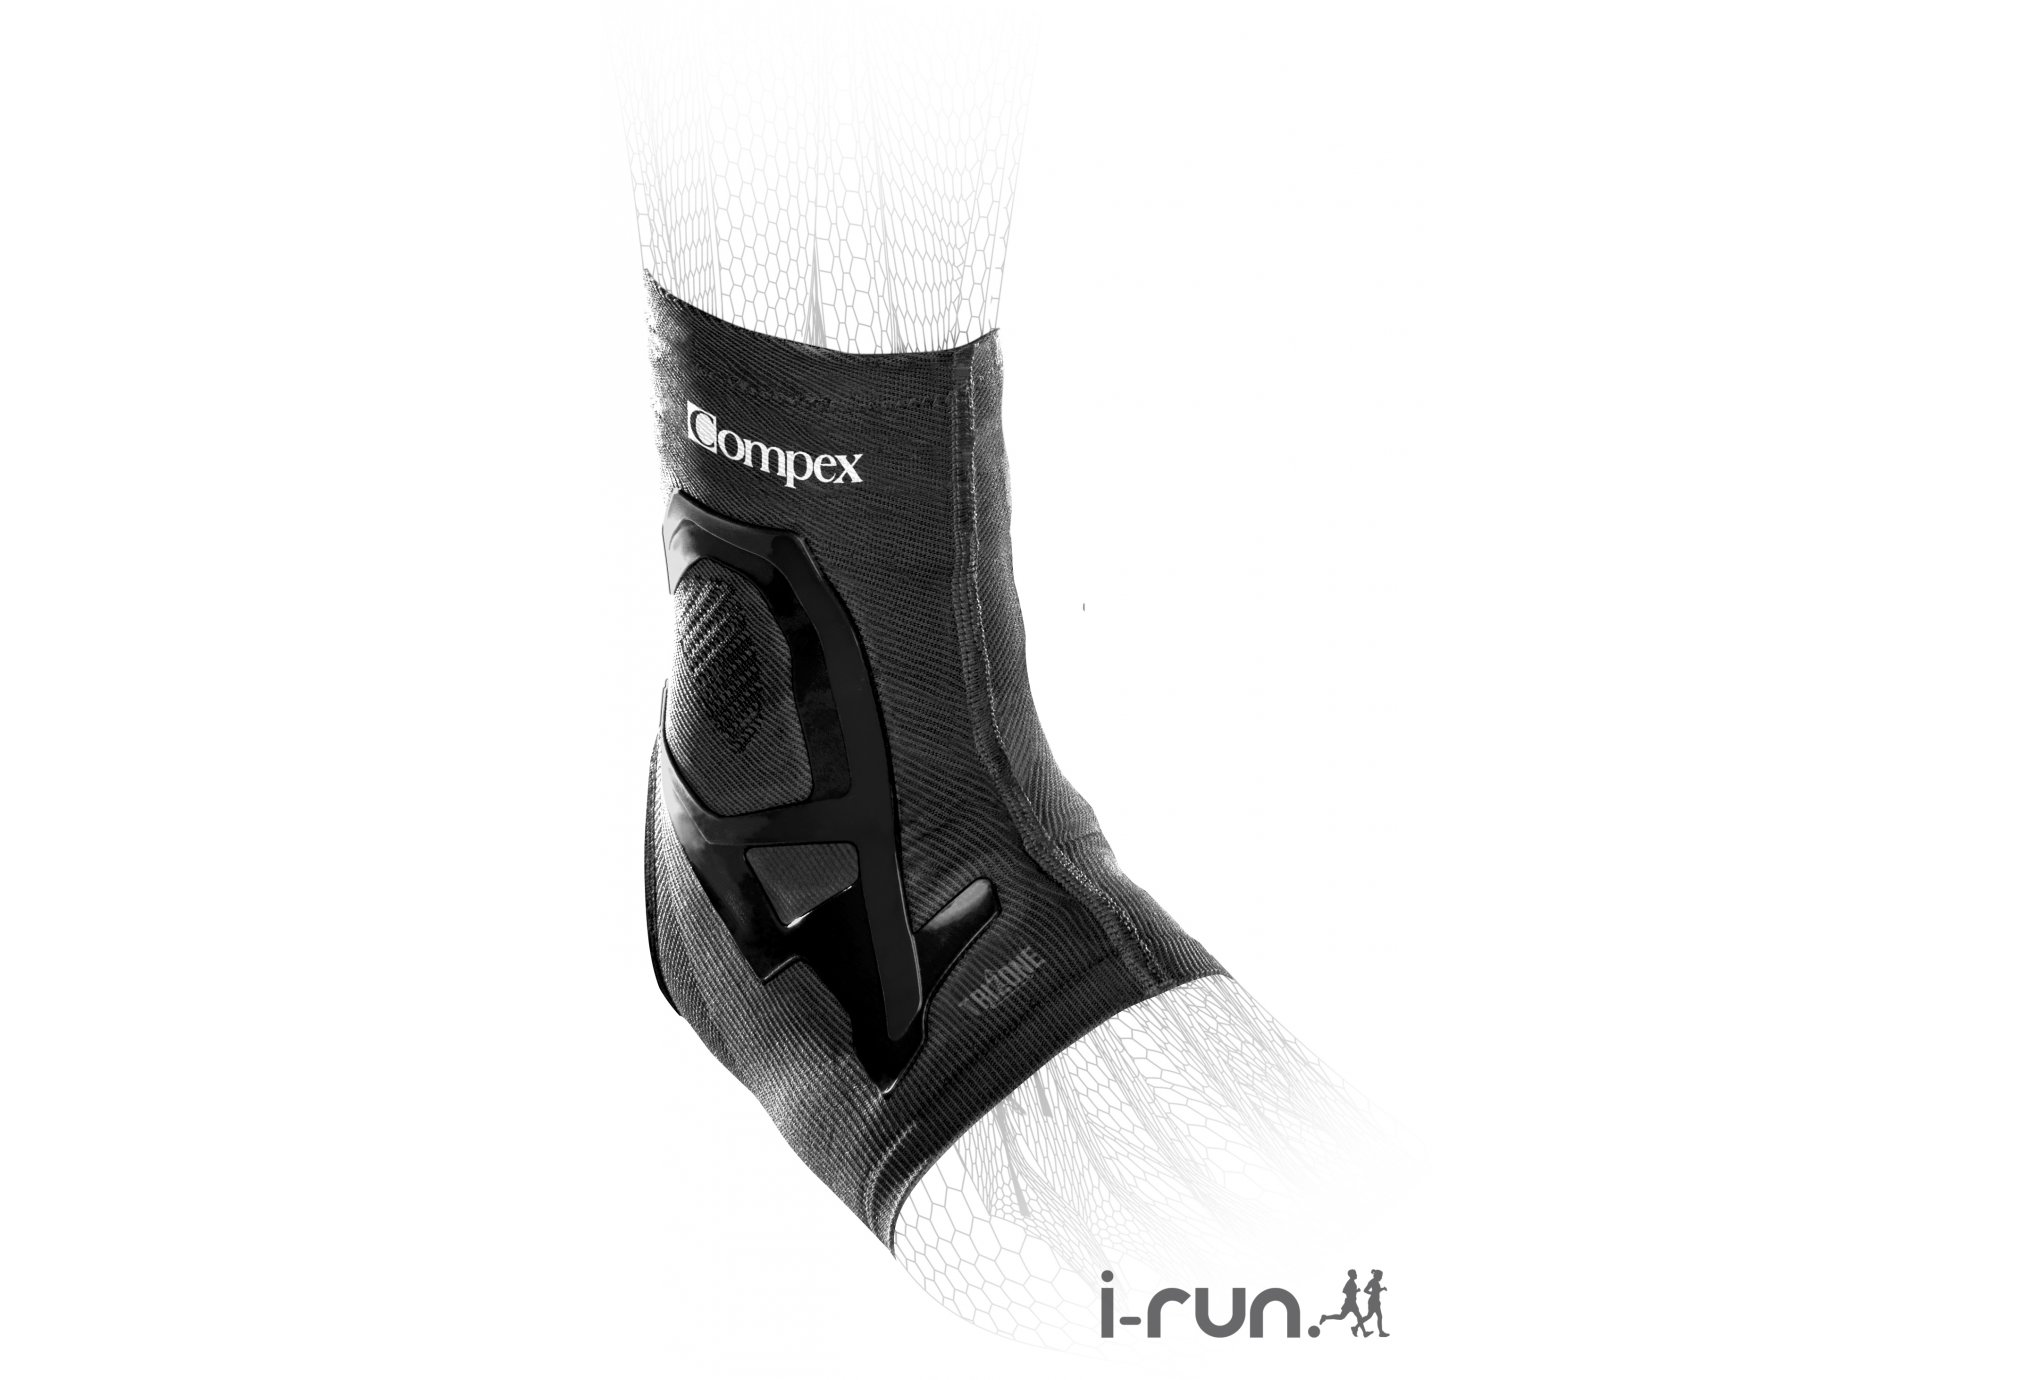 Compex TriZone Ankle Protection musculaire & articulaire